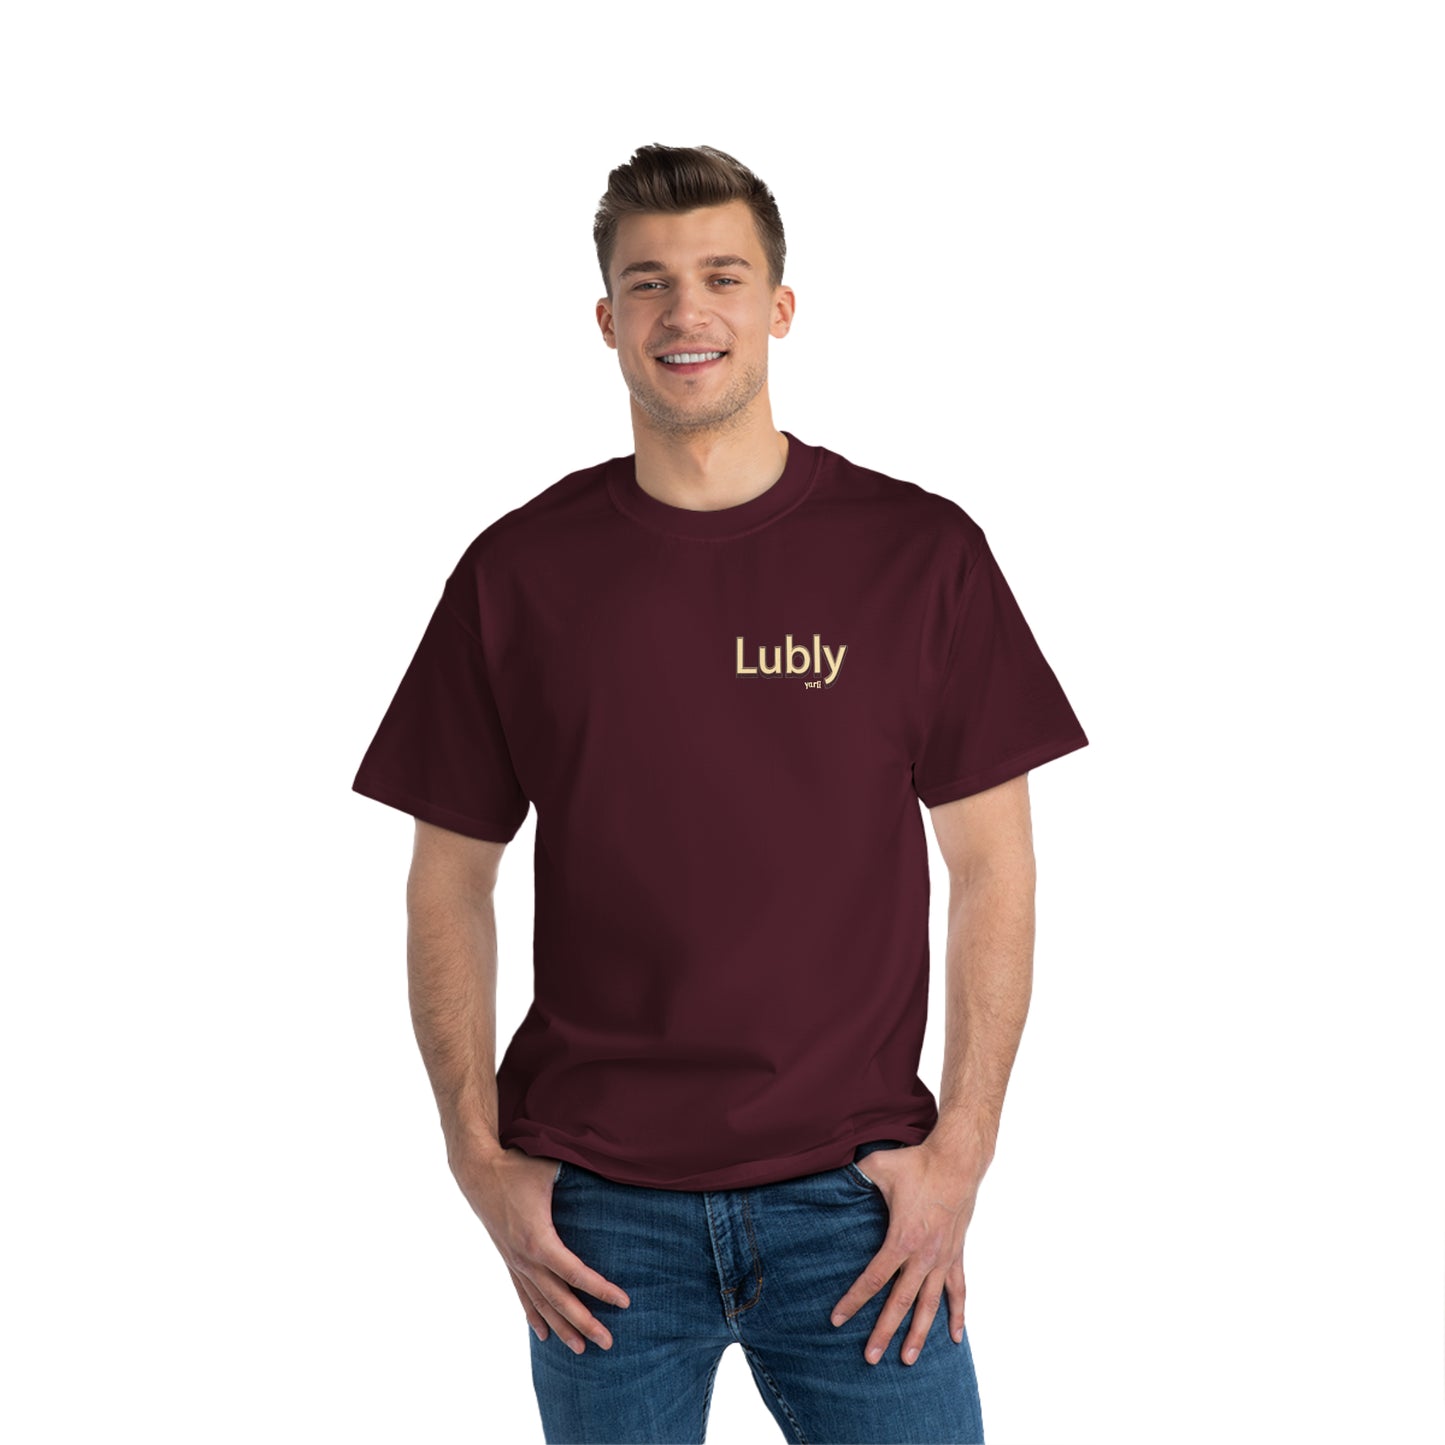 Lubly Short-Sleeve T-Shirt